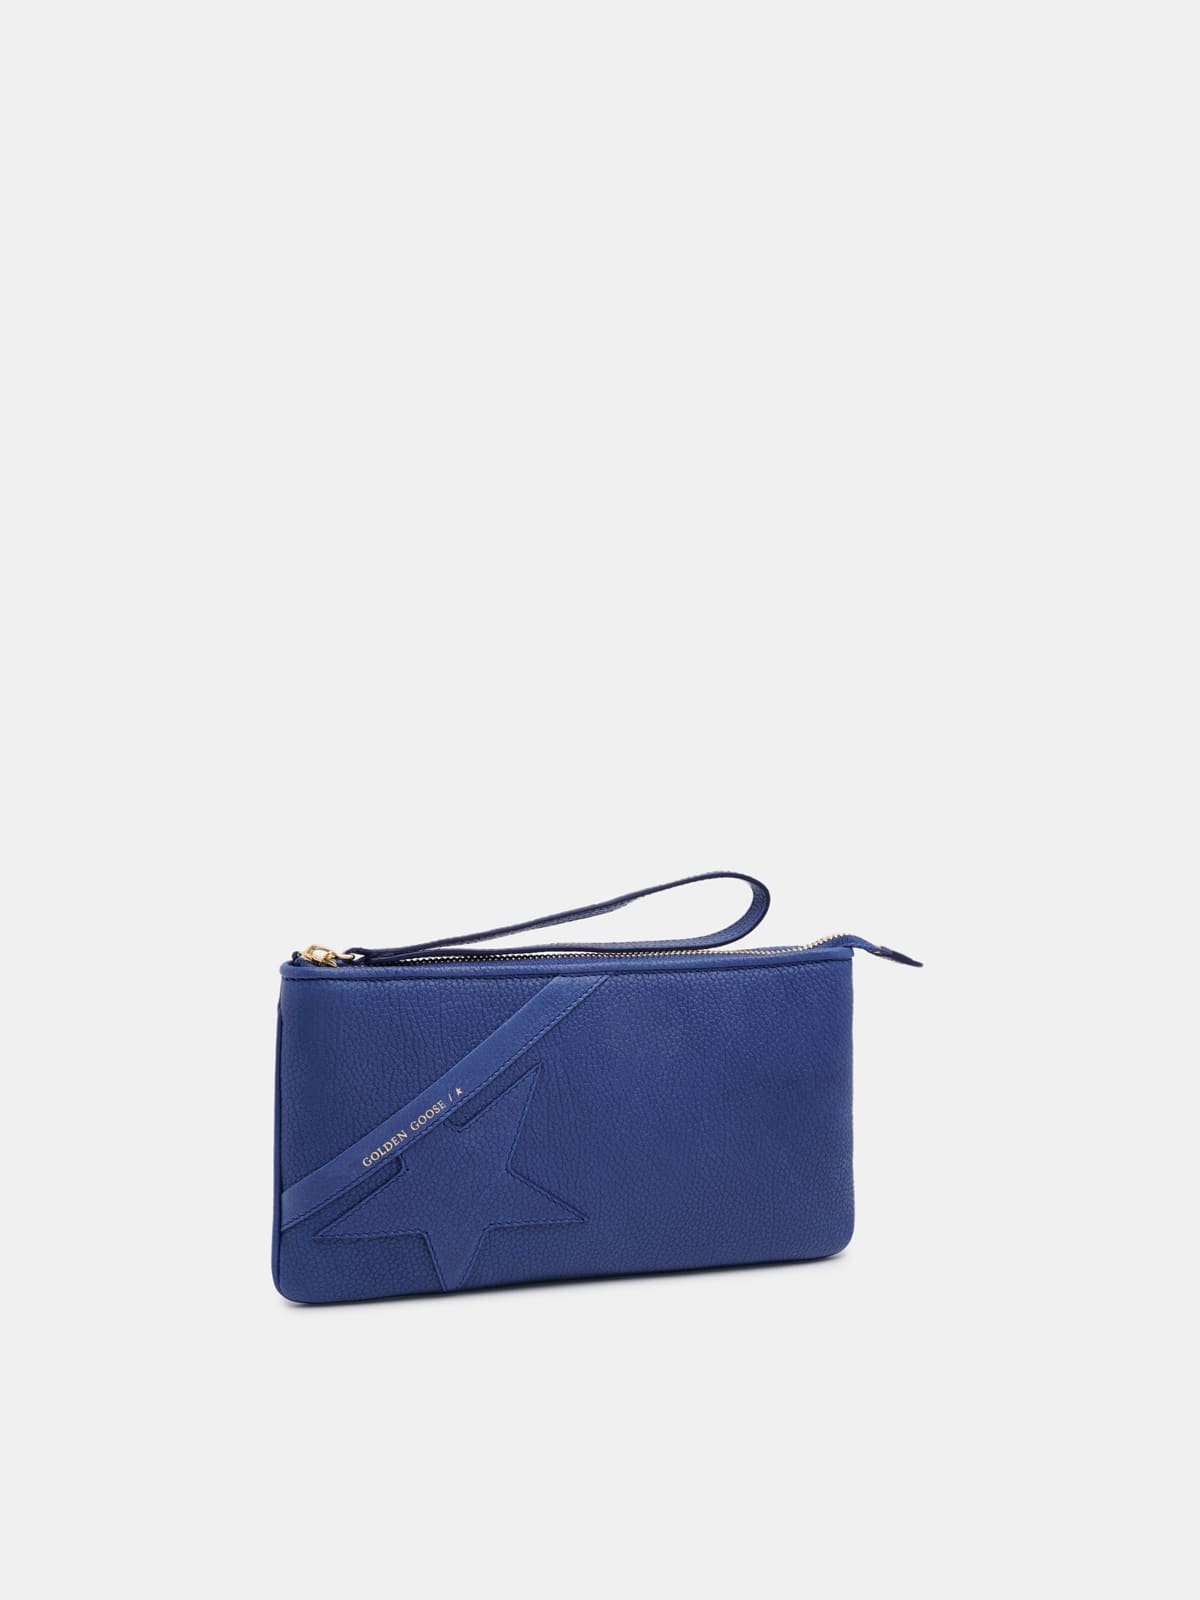 Blue Star Wrist clutch bag in grained leather